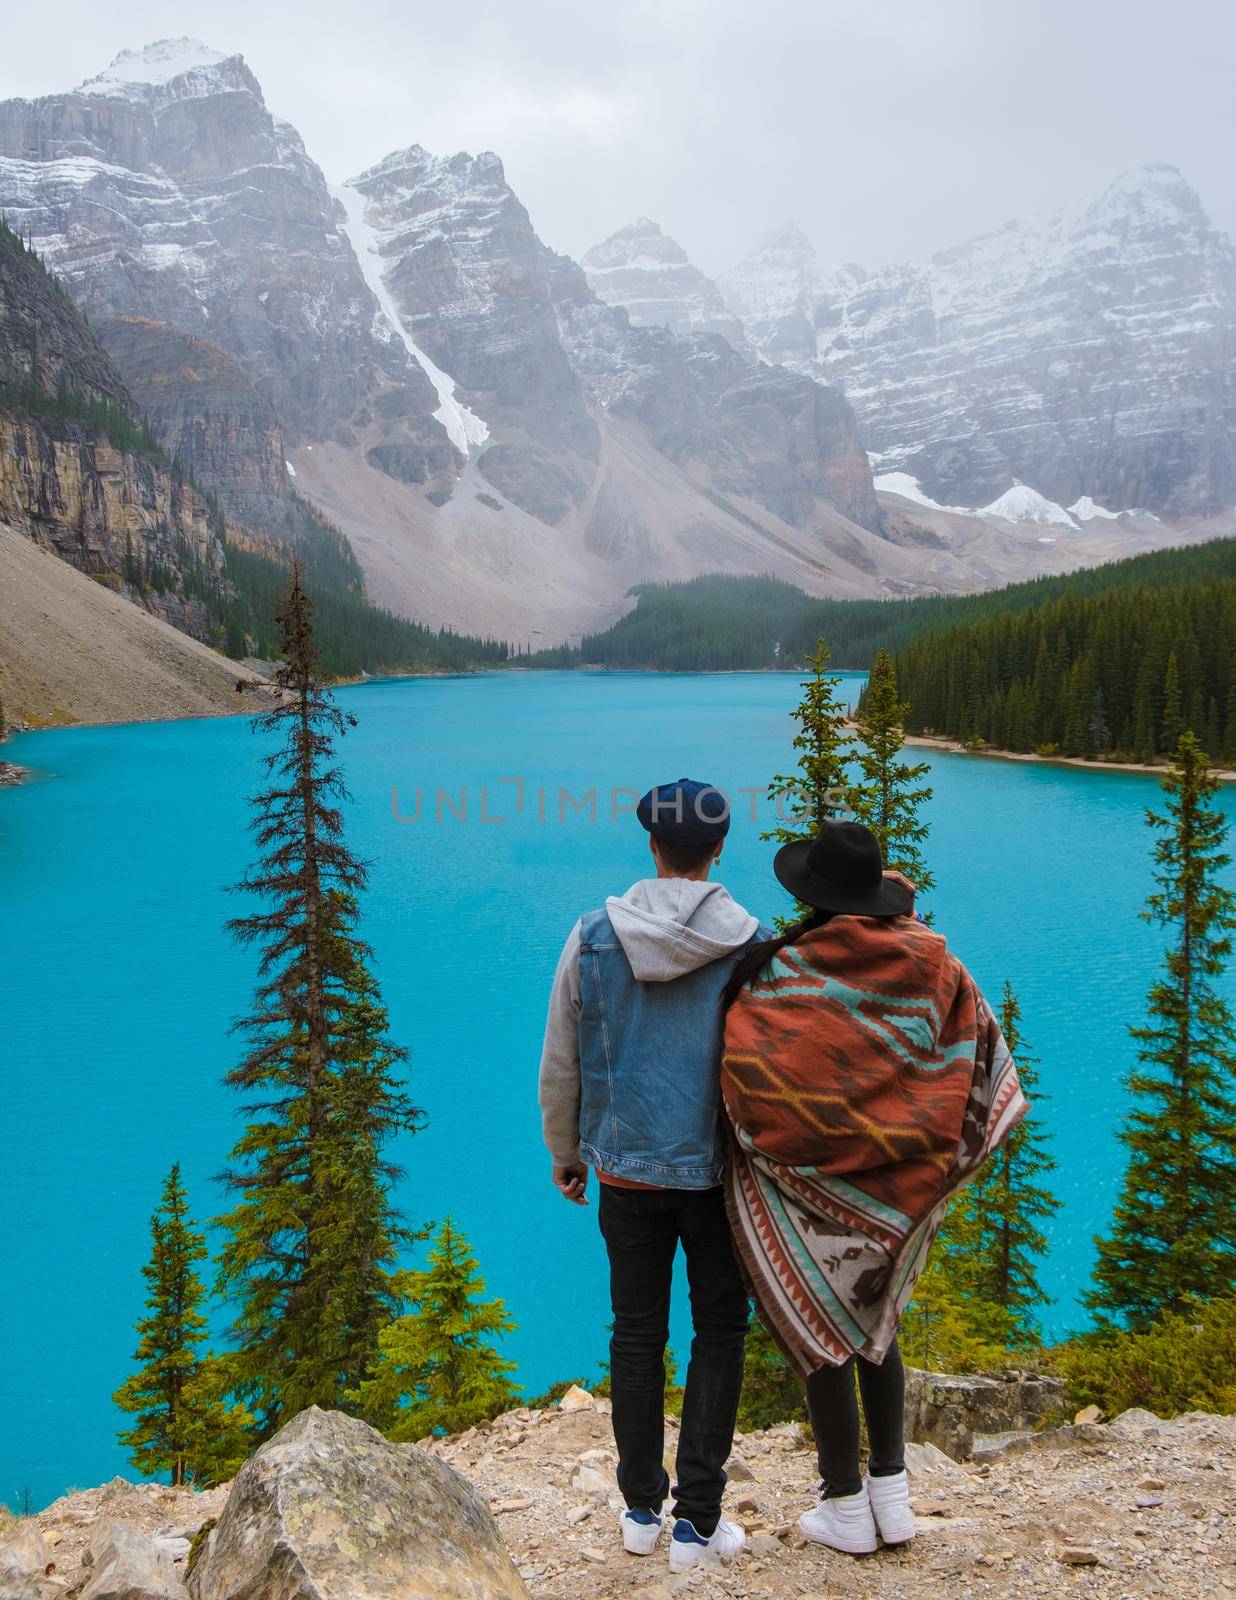 Lake moraine during a cold snowy day in Canada, turquoise waters of the Moraine lake with snow. Banff National Park of Canada Canadian Rockies. Young couple men and women standing by the lake